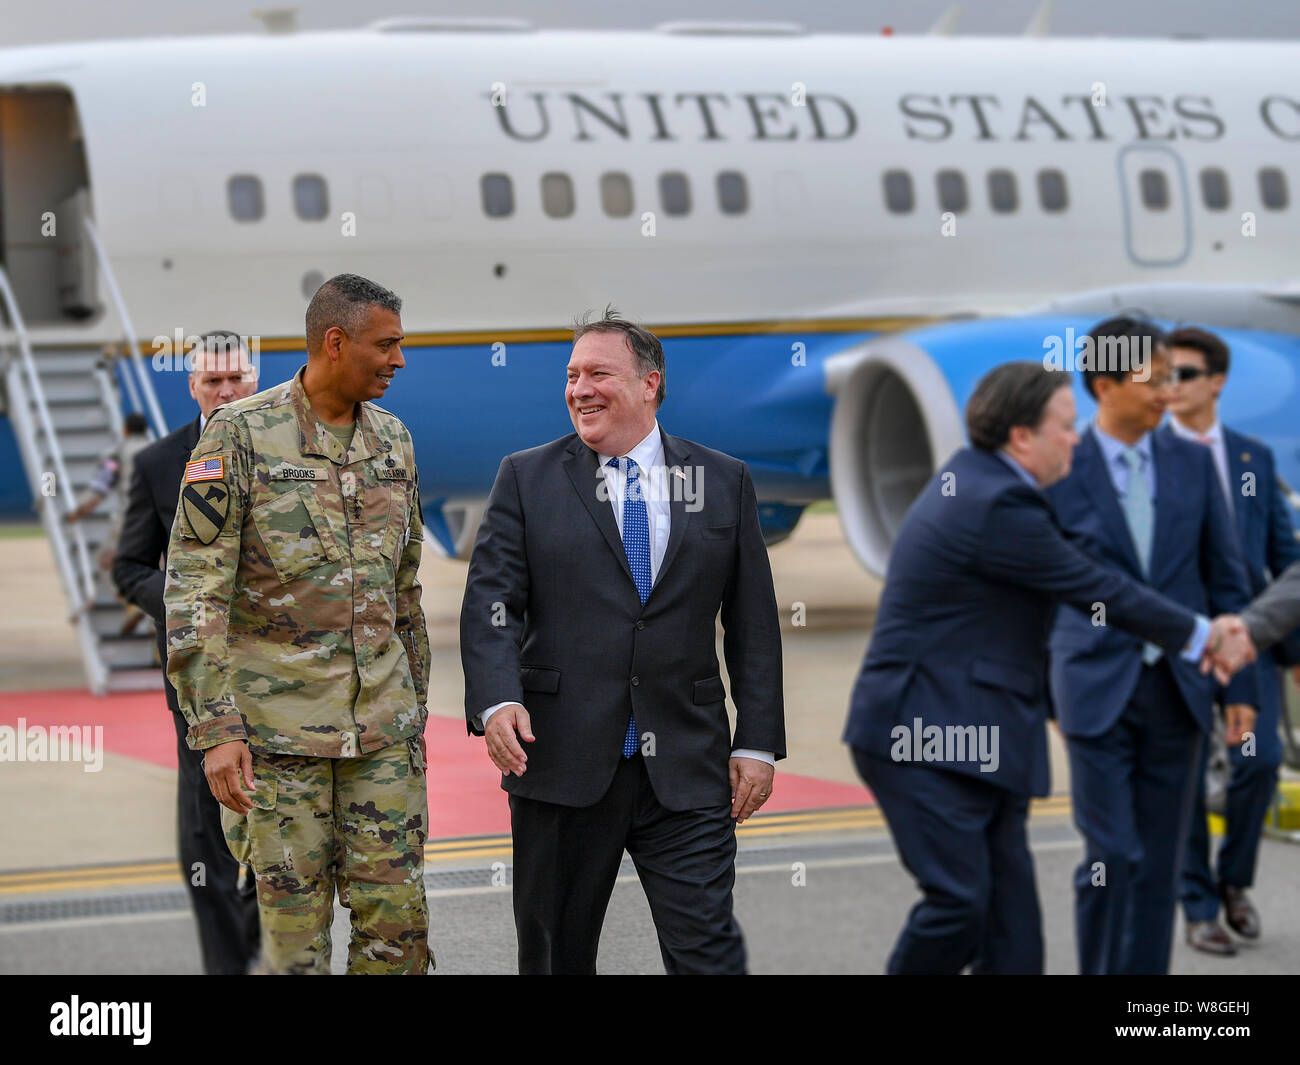 U.S. Secretary of State Mike Pompeo is greeted by USFK Commander General Vincent Brooks upon arrival to Osan Air Base in Osan, Seoul on June 13, 2018. Stock Photo